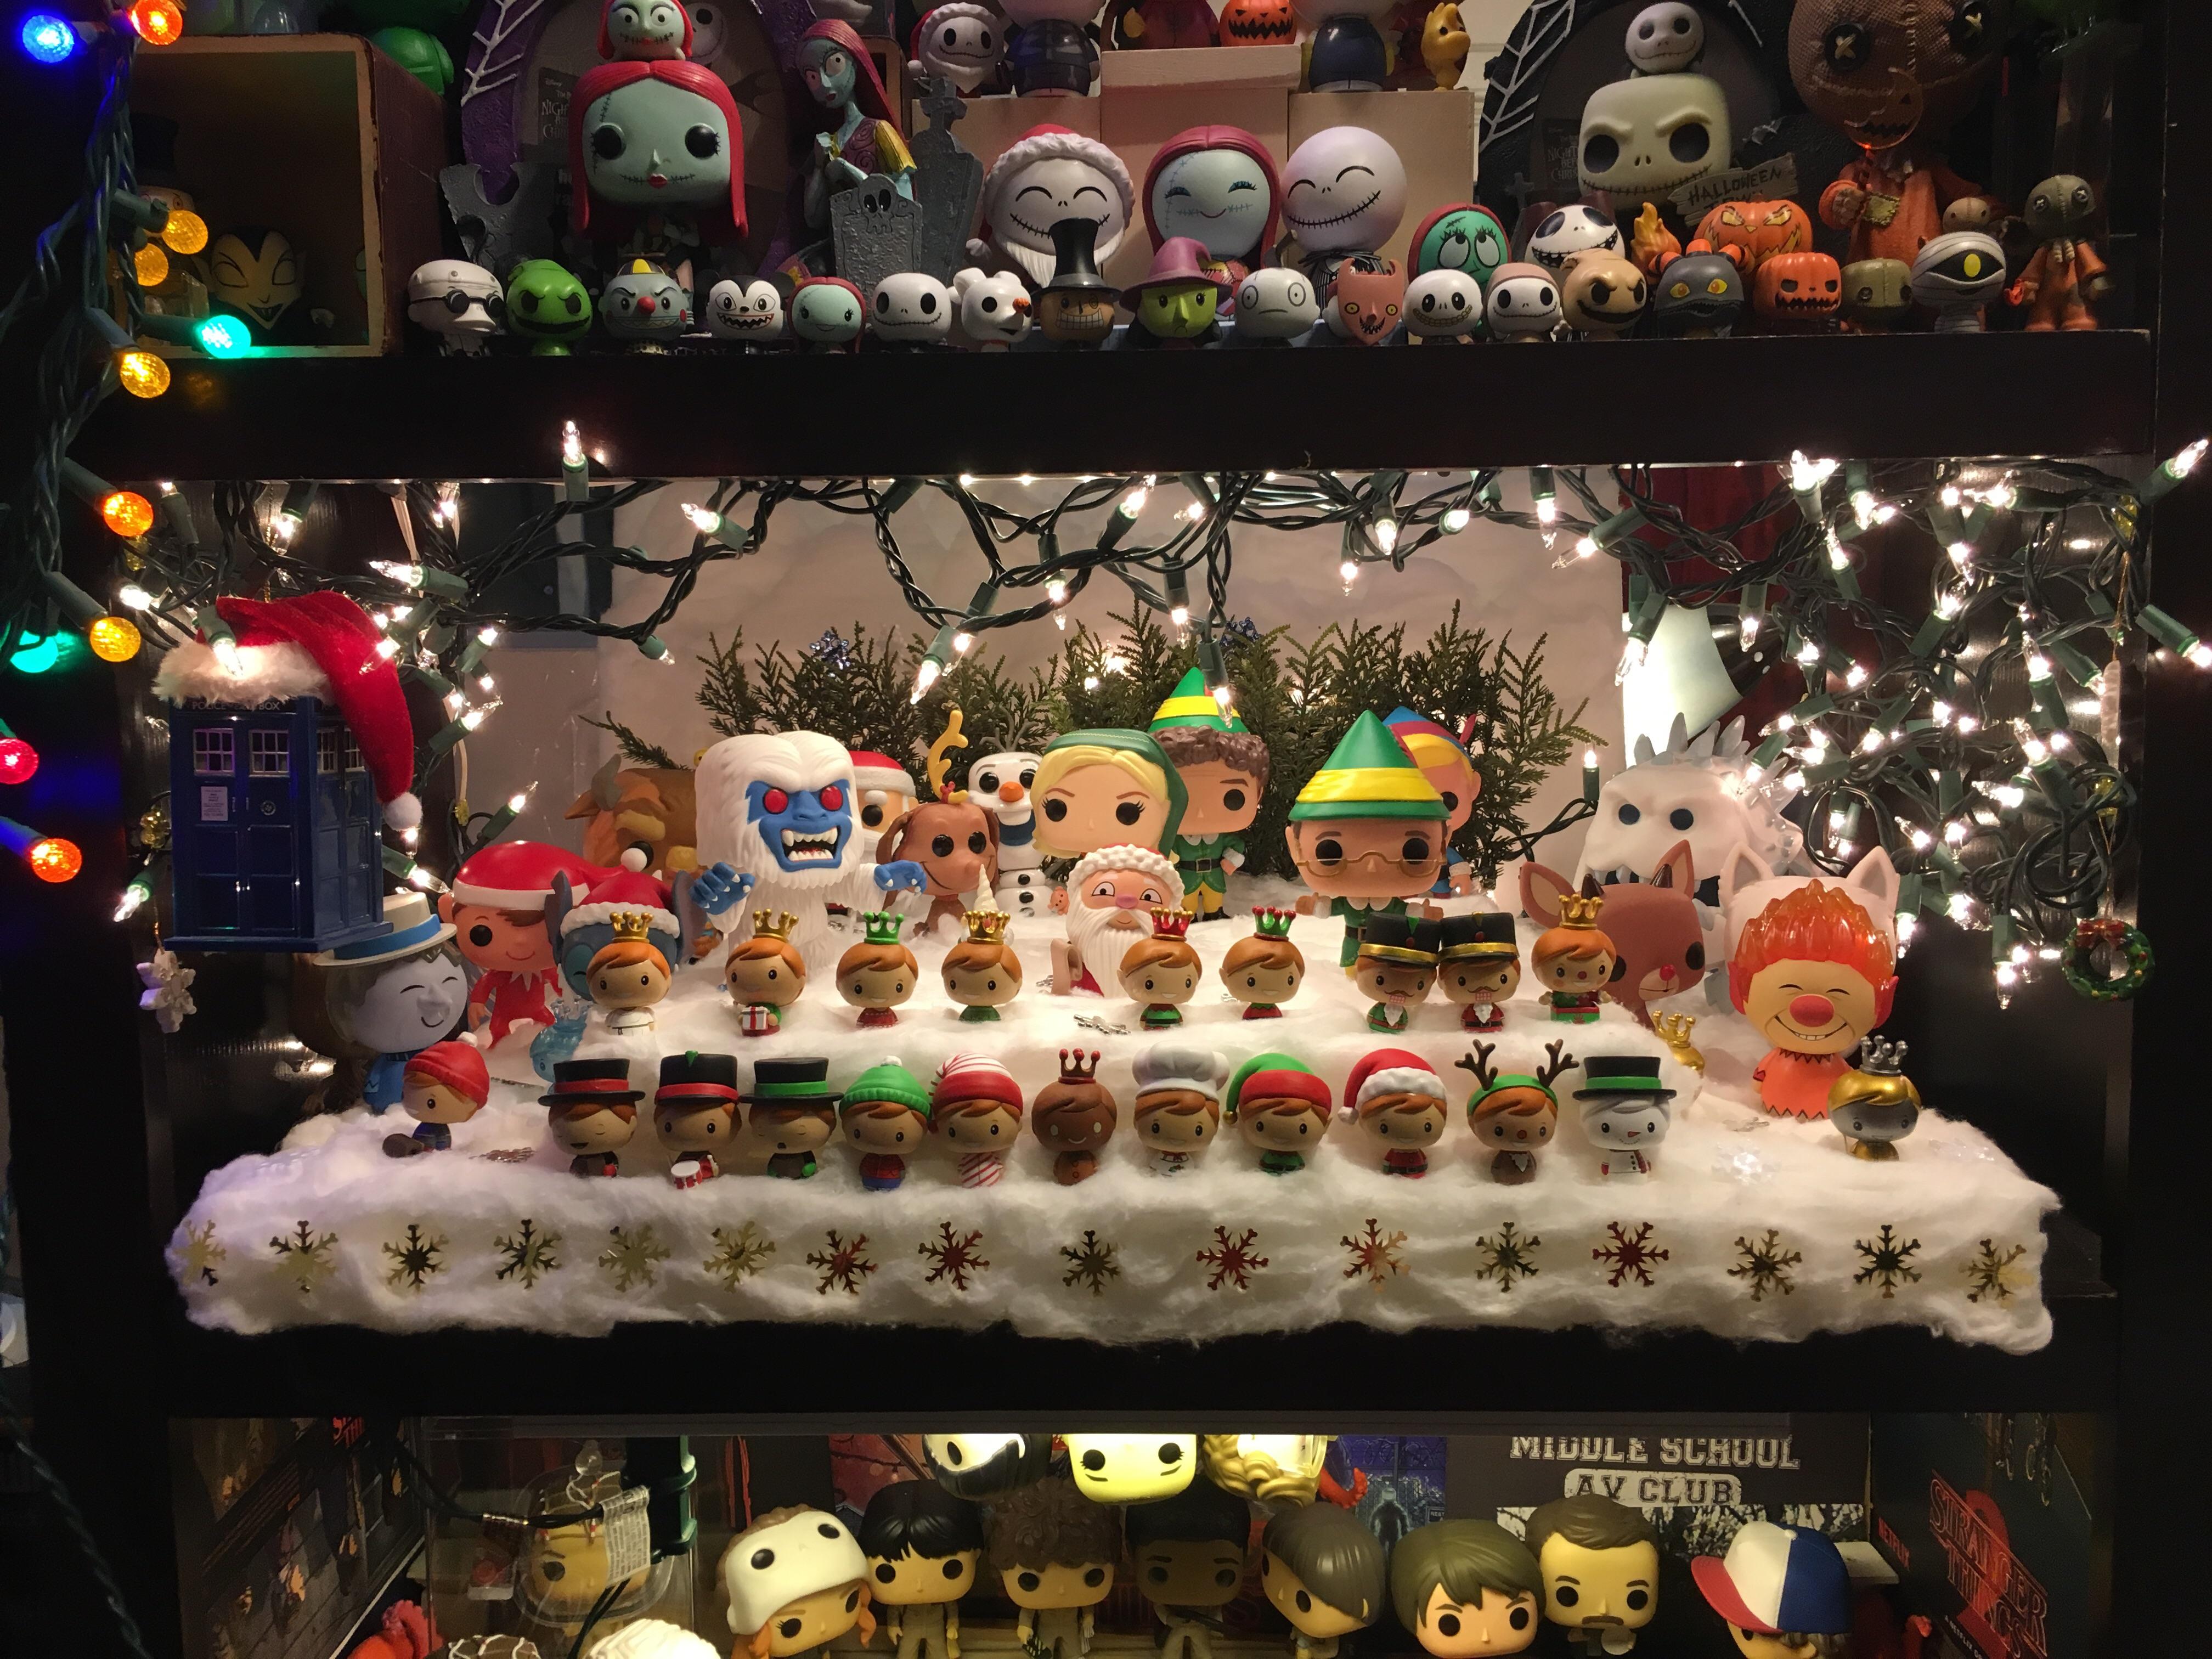 SPOILER. My Funko Christmas display so far. Still waiting for the Grinch :)